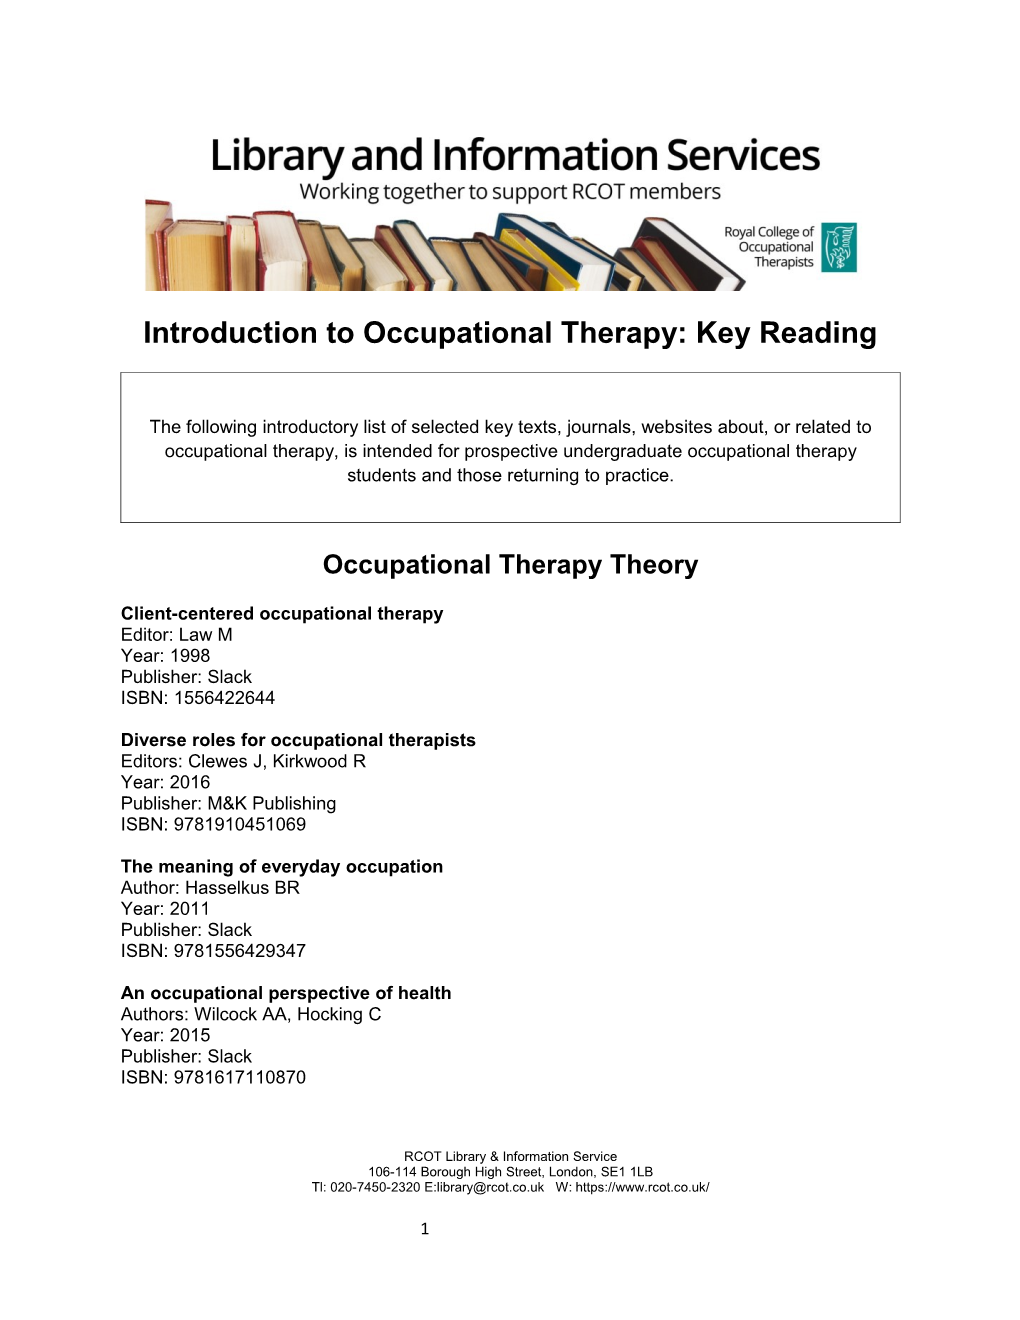 Introduction to Occupational Therapy: Key Reading